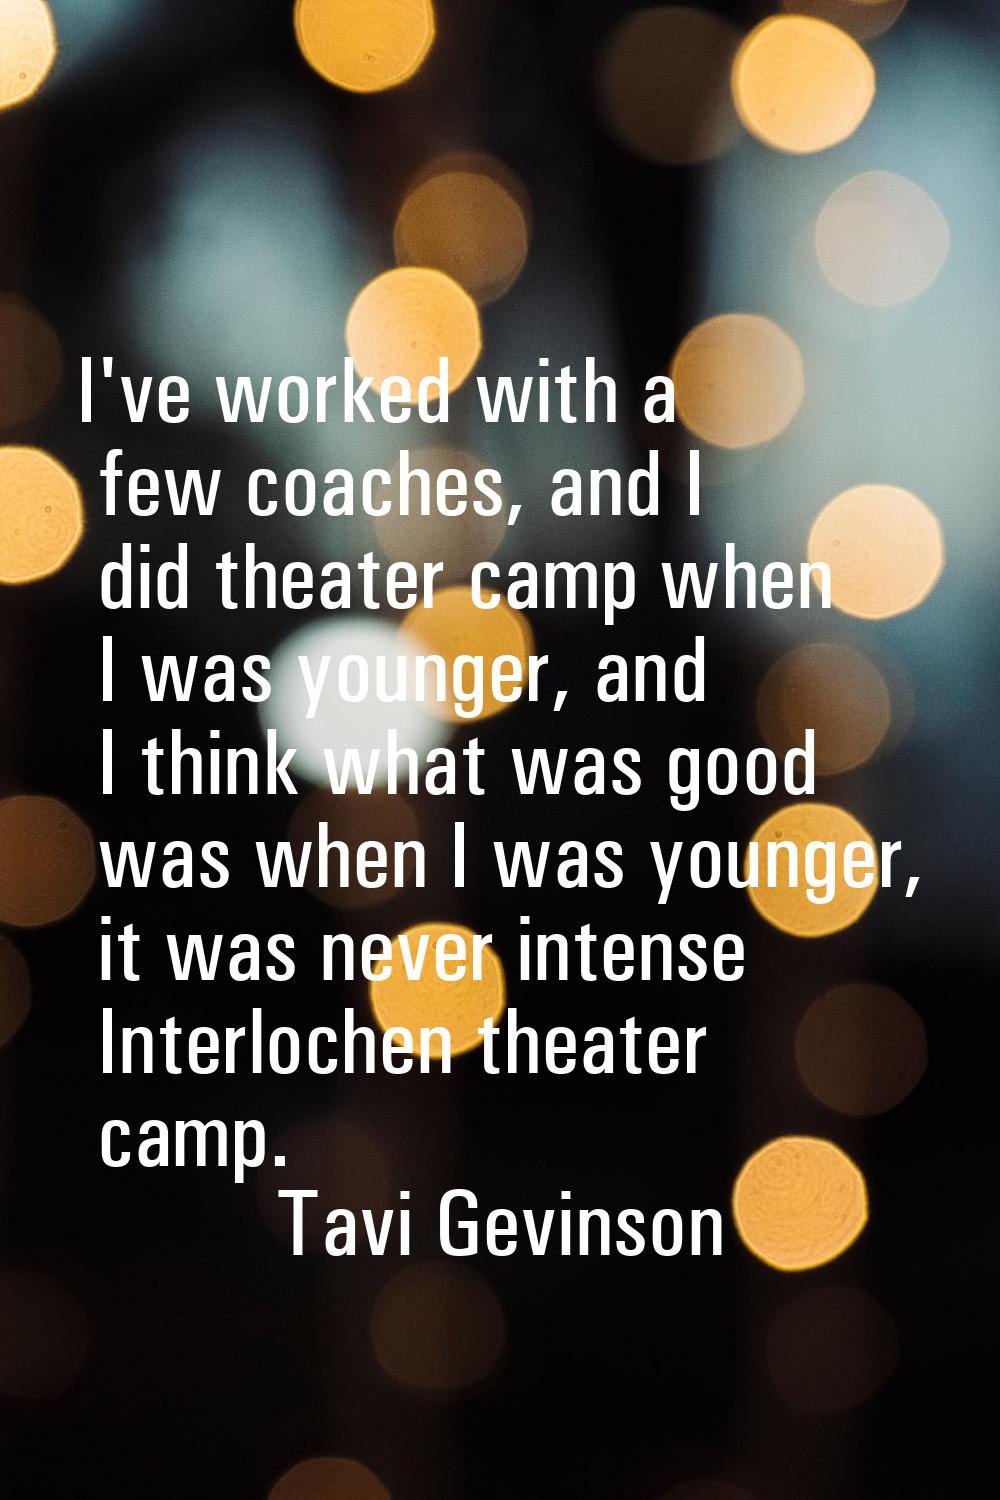 I've worked with a few coaches, and I did theater camp when I was younger, and I think what was goo